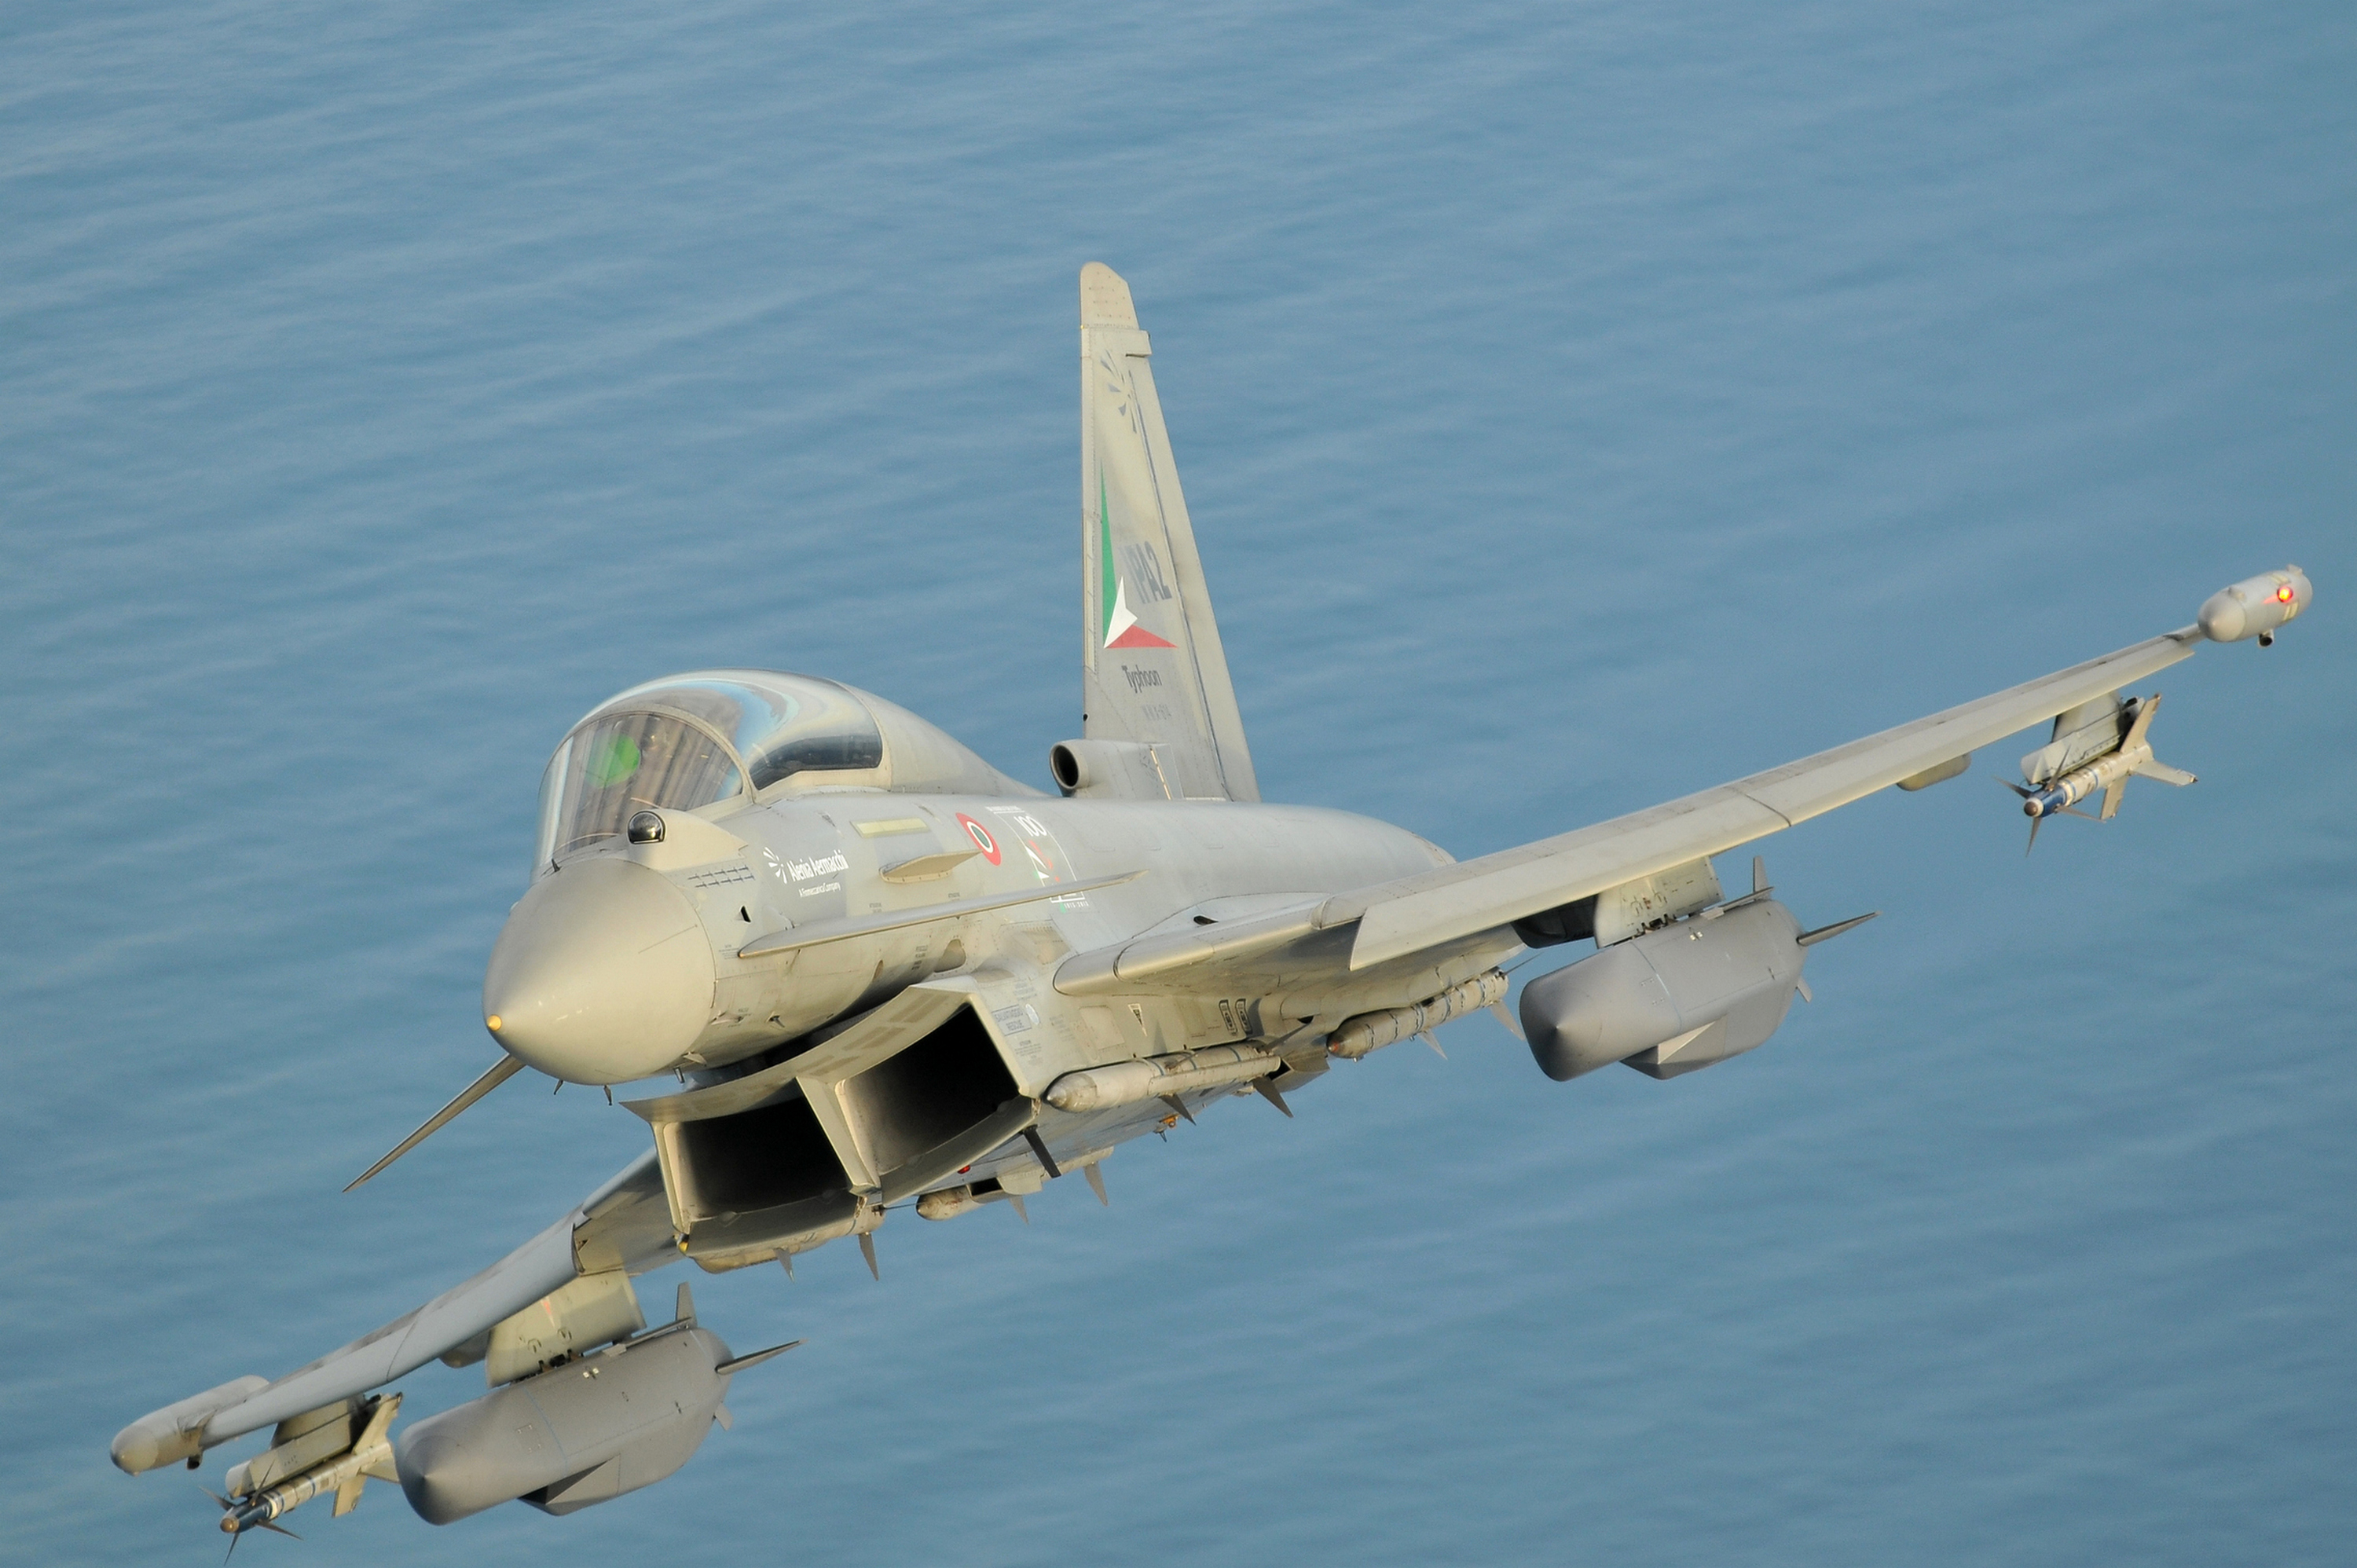 The Storm Shadow, already in service with the Italian Air Force and Royal Air Force Tornados, is a conventionally armed, stealthy, long-range stand-off precision weapon designed to neutralise high value targets.